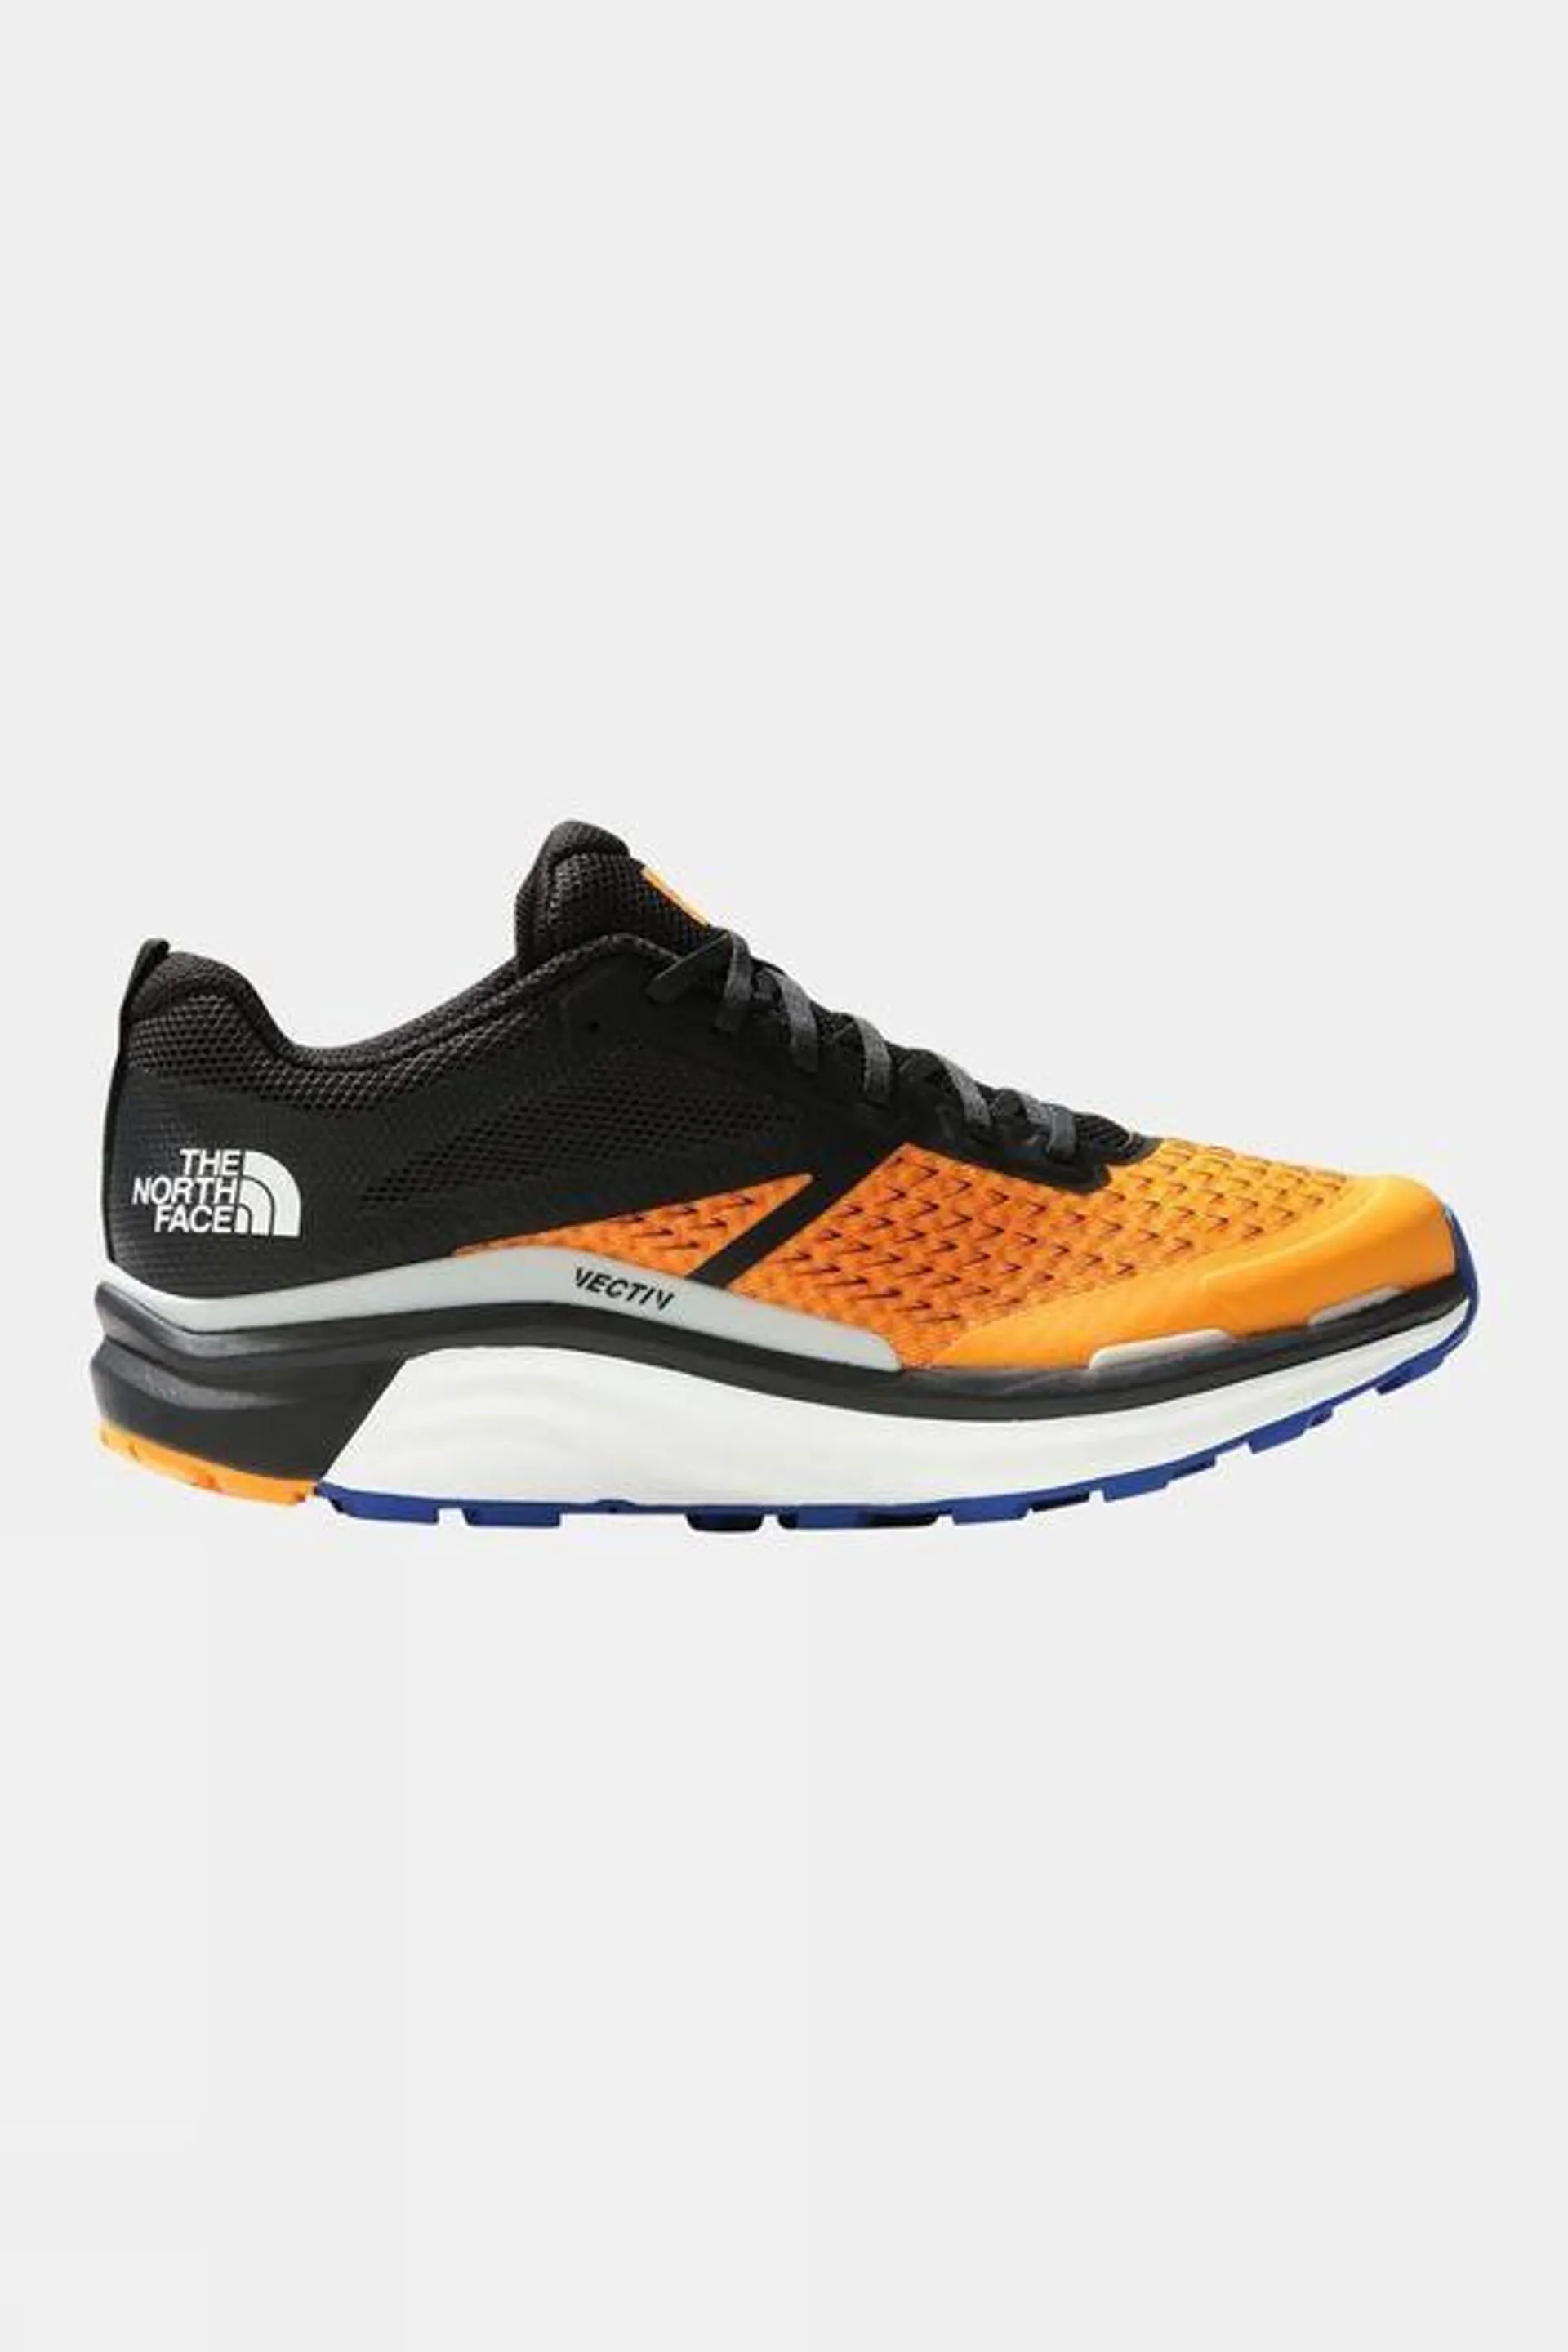 The North Face Mens Vectiv Enduris II Shoes